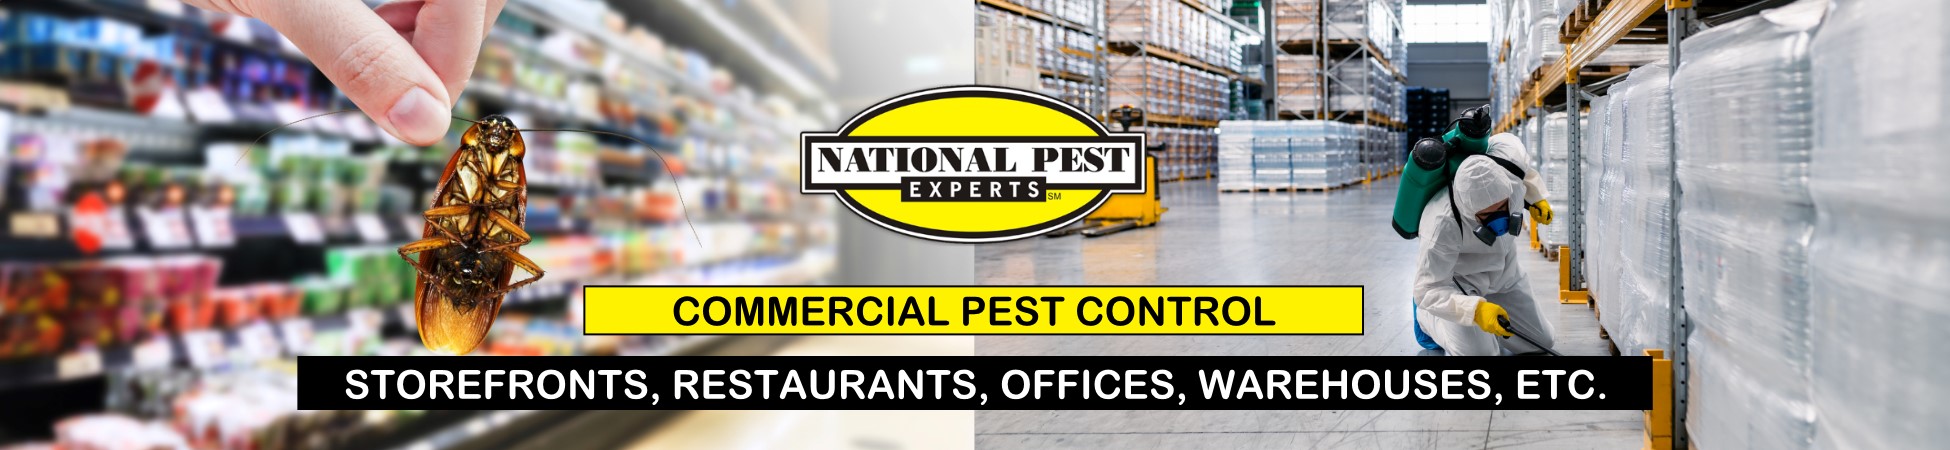 National Pest Experts - Commercial & Industrial exterminating and pest control in Smithtown, NY